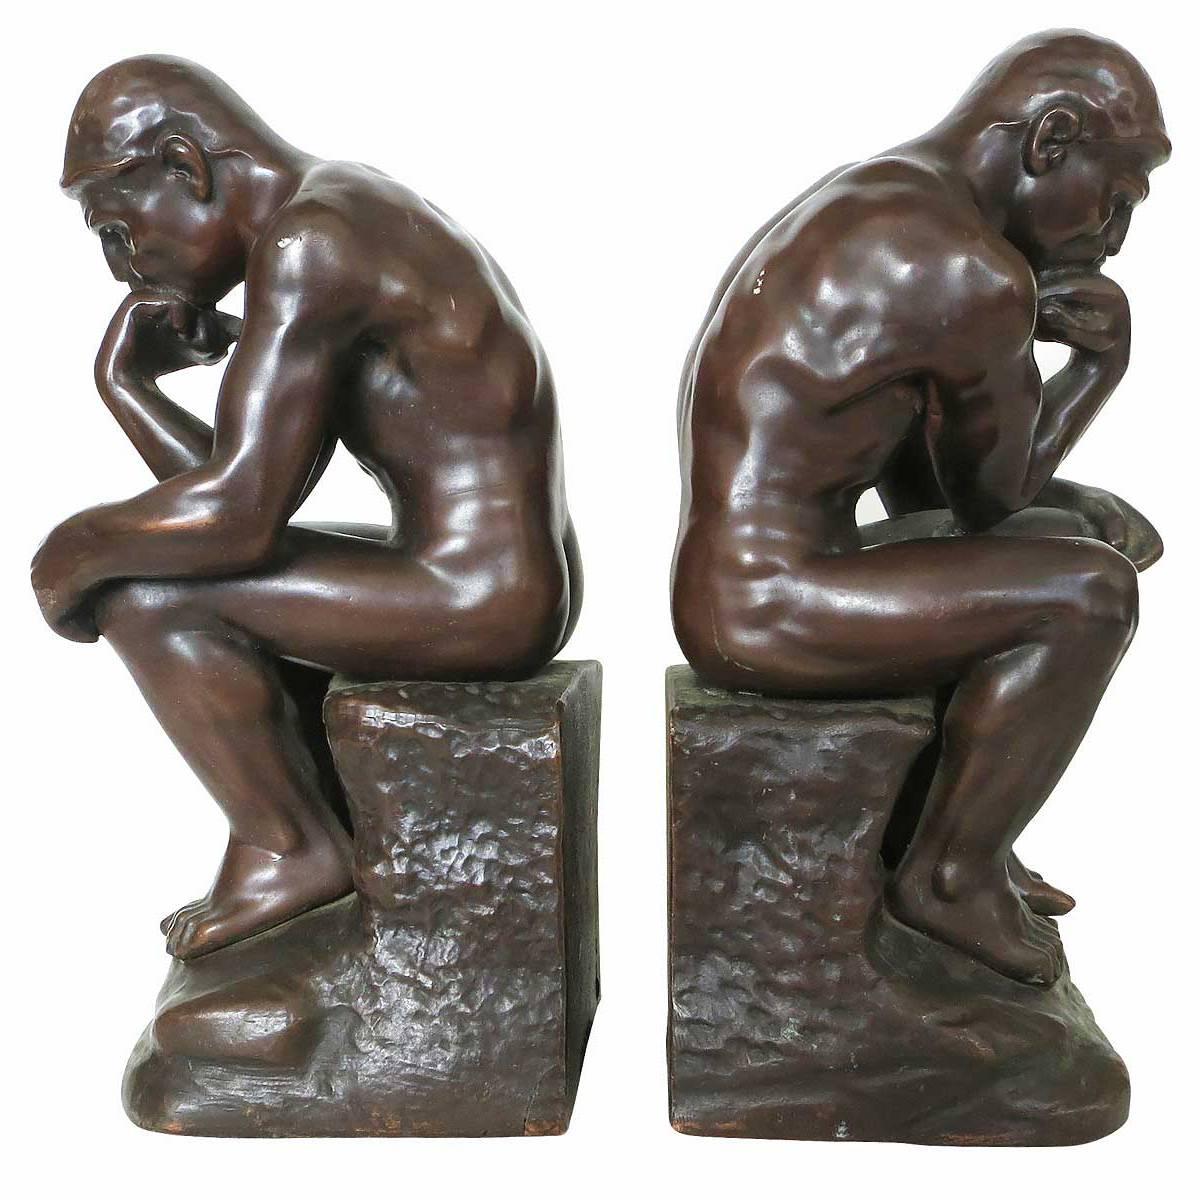 'The Thinker' Bookends Statues by Jennings Brothers